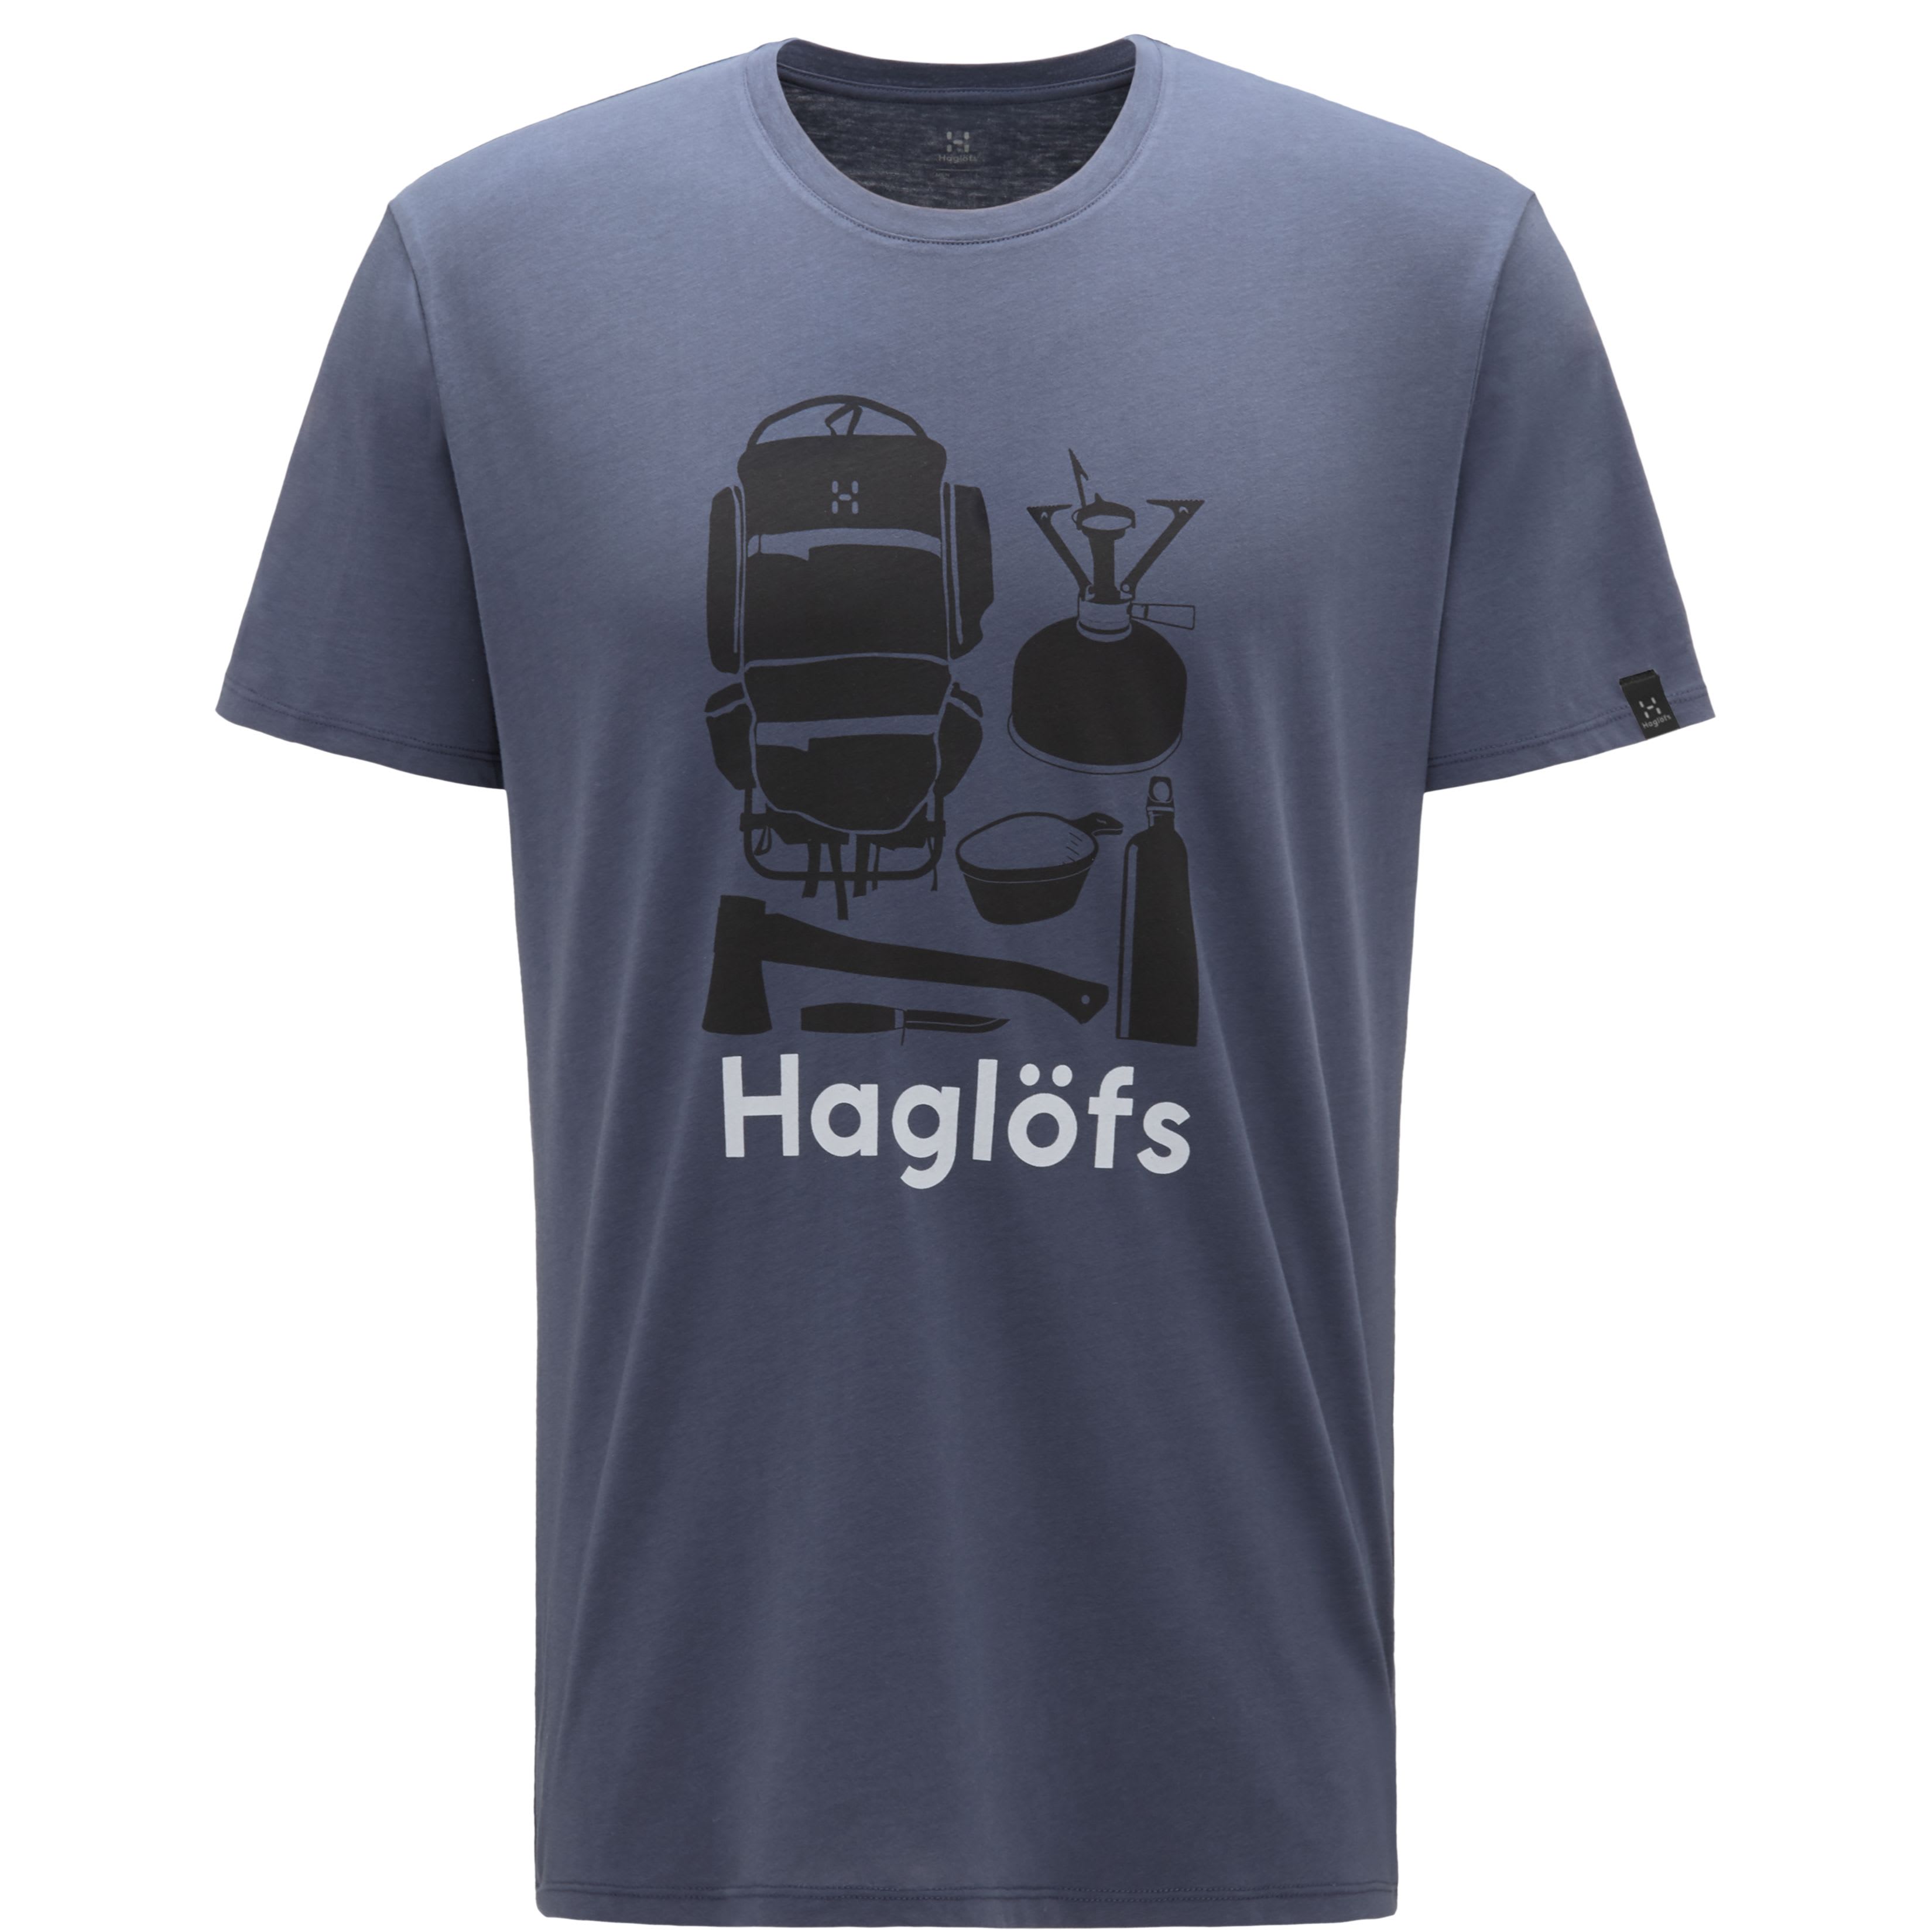 Haglöfs Tee from Outnorth